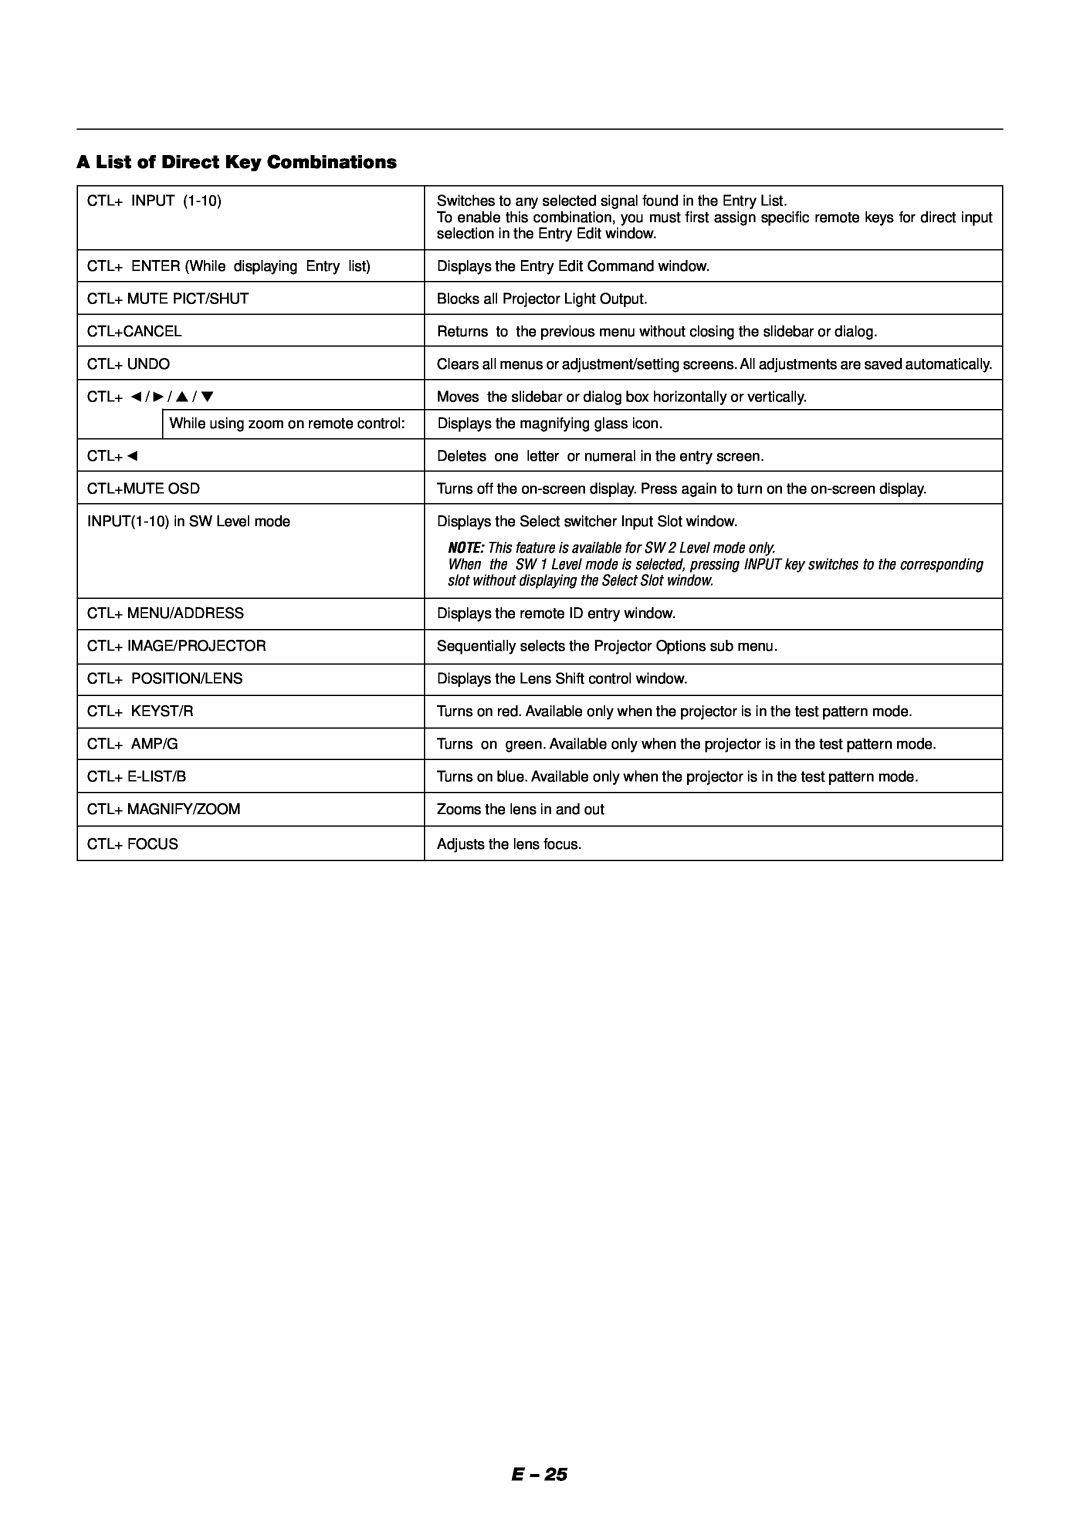 NEC XT9000 user manual A List of Direct Key Combinations, NOTE This feature is available for SW 2 Level mode only 